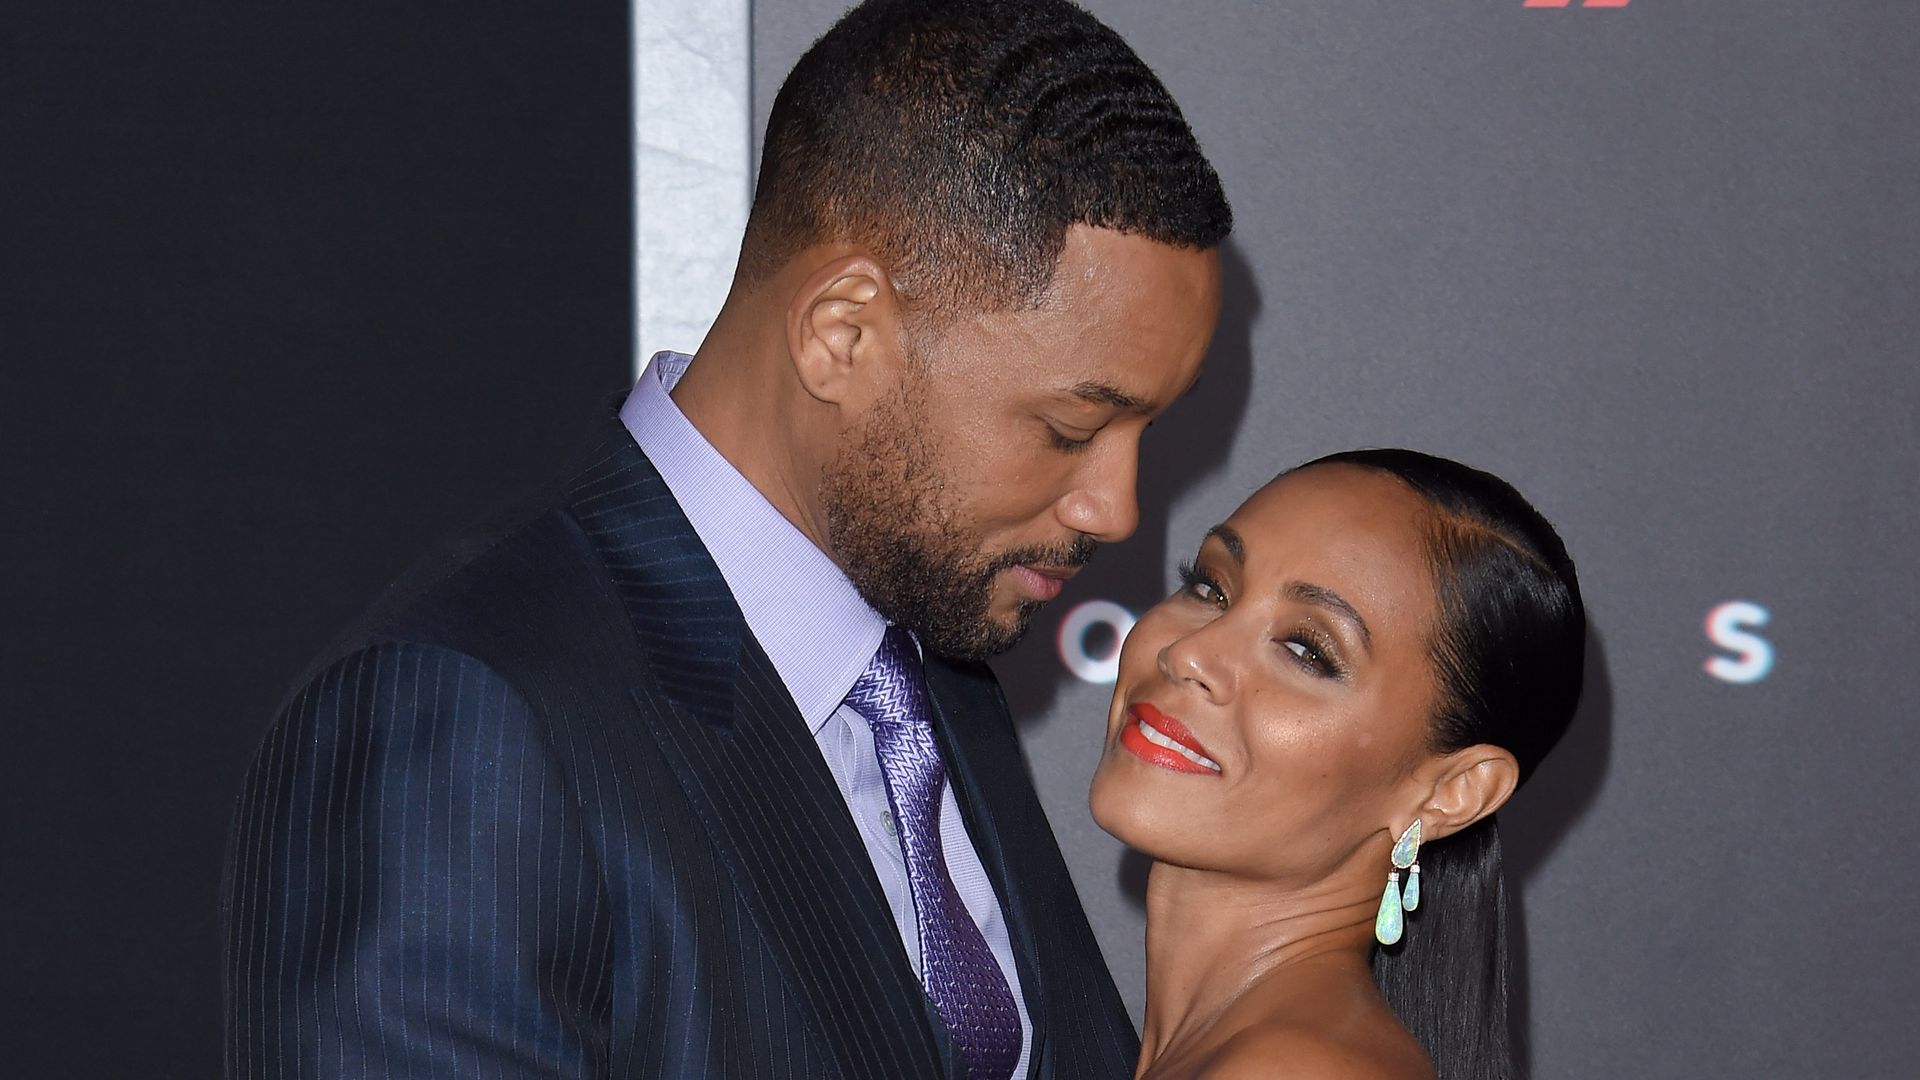 Will Smith and Jada Pinkett Smith smiling at each other while being photographed at a red carpet event